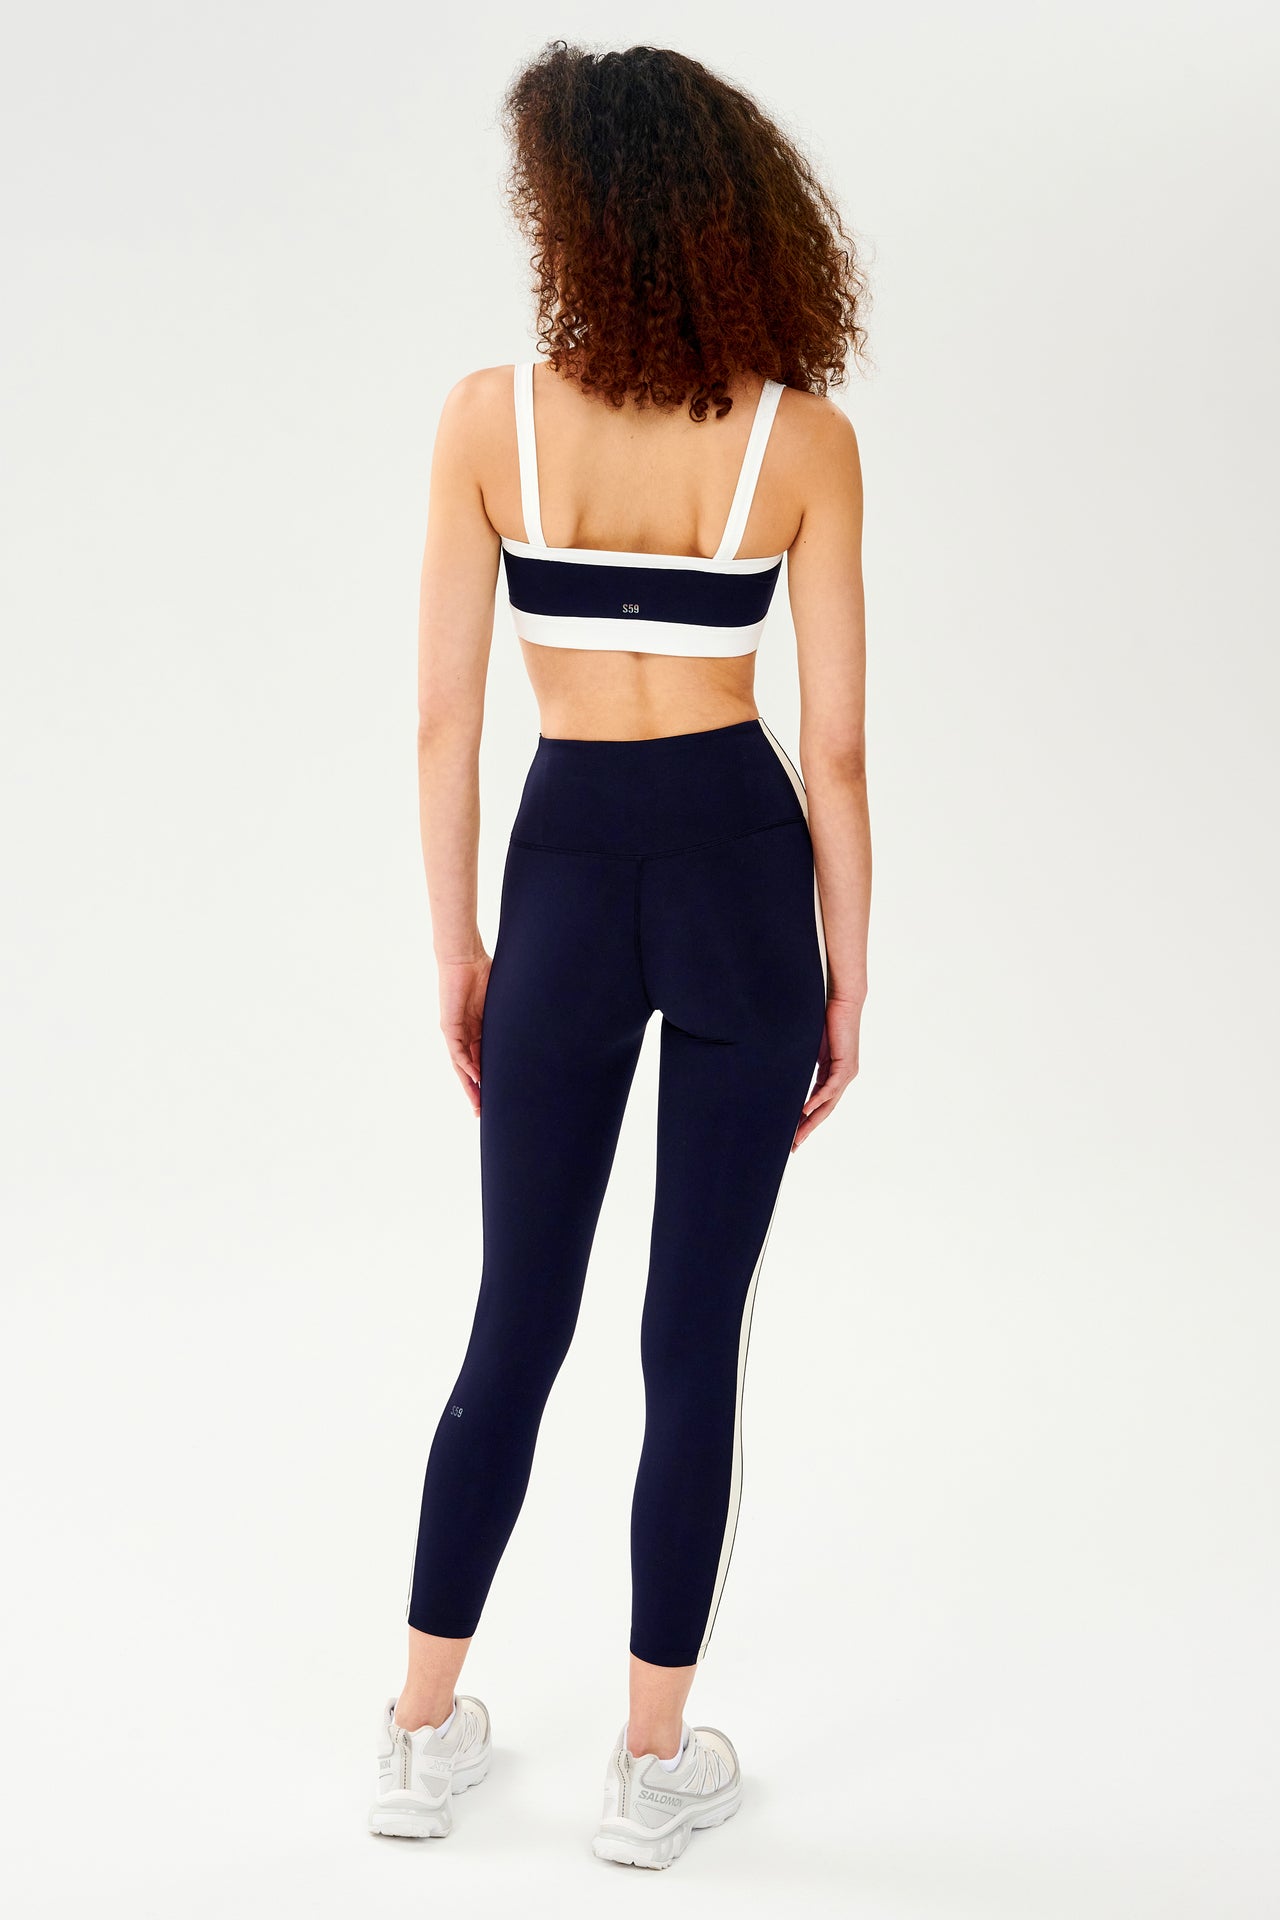 The back view of a woman wearing a SPLITS59 Monah Rigor Bra and leggings, capturing the retro sport vibe.